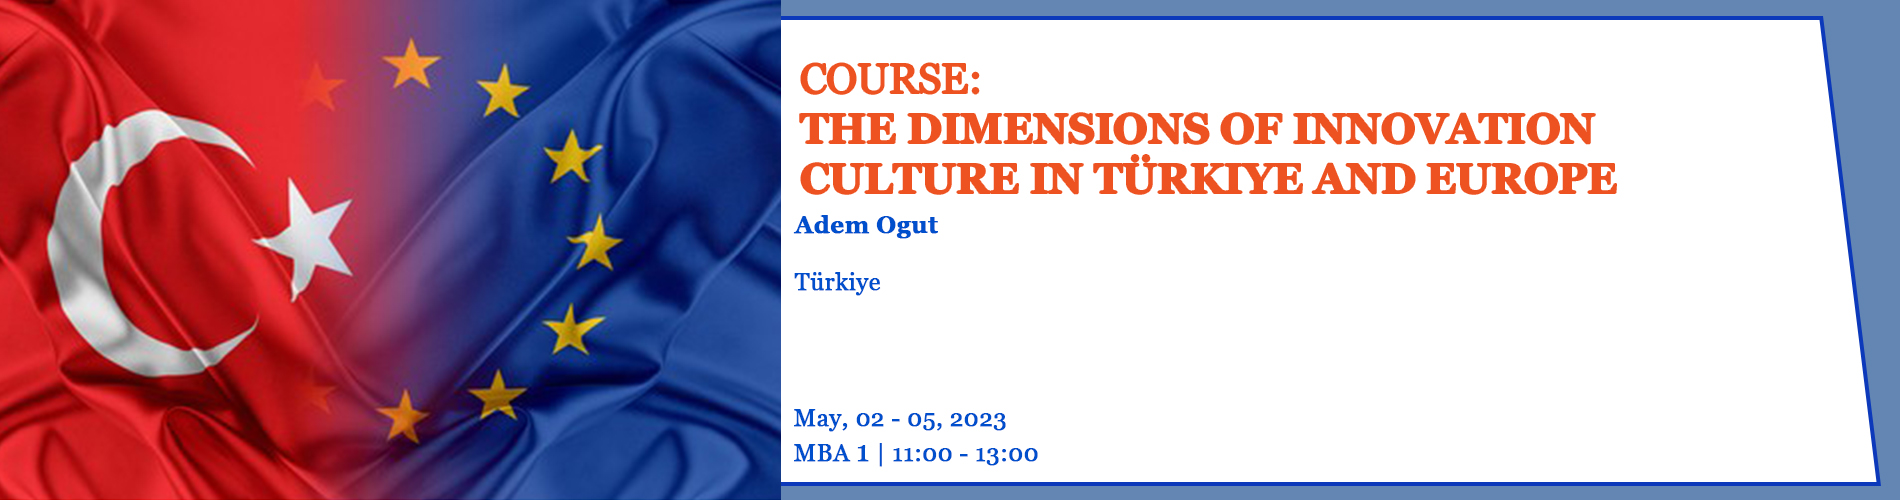 2023052-_2023055_-_The_Dimensions_of_Innovation_Culture_in_Trkiye_and_Europe